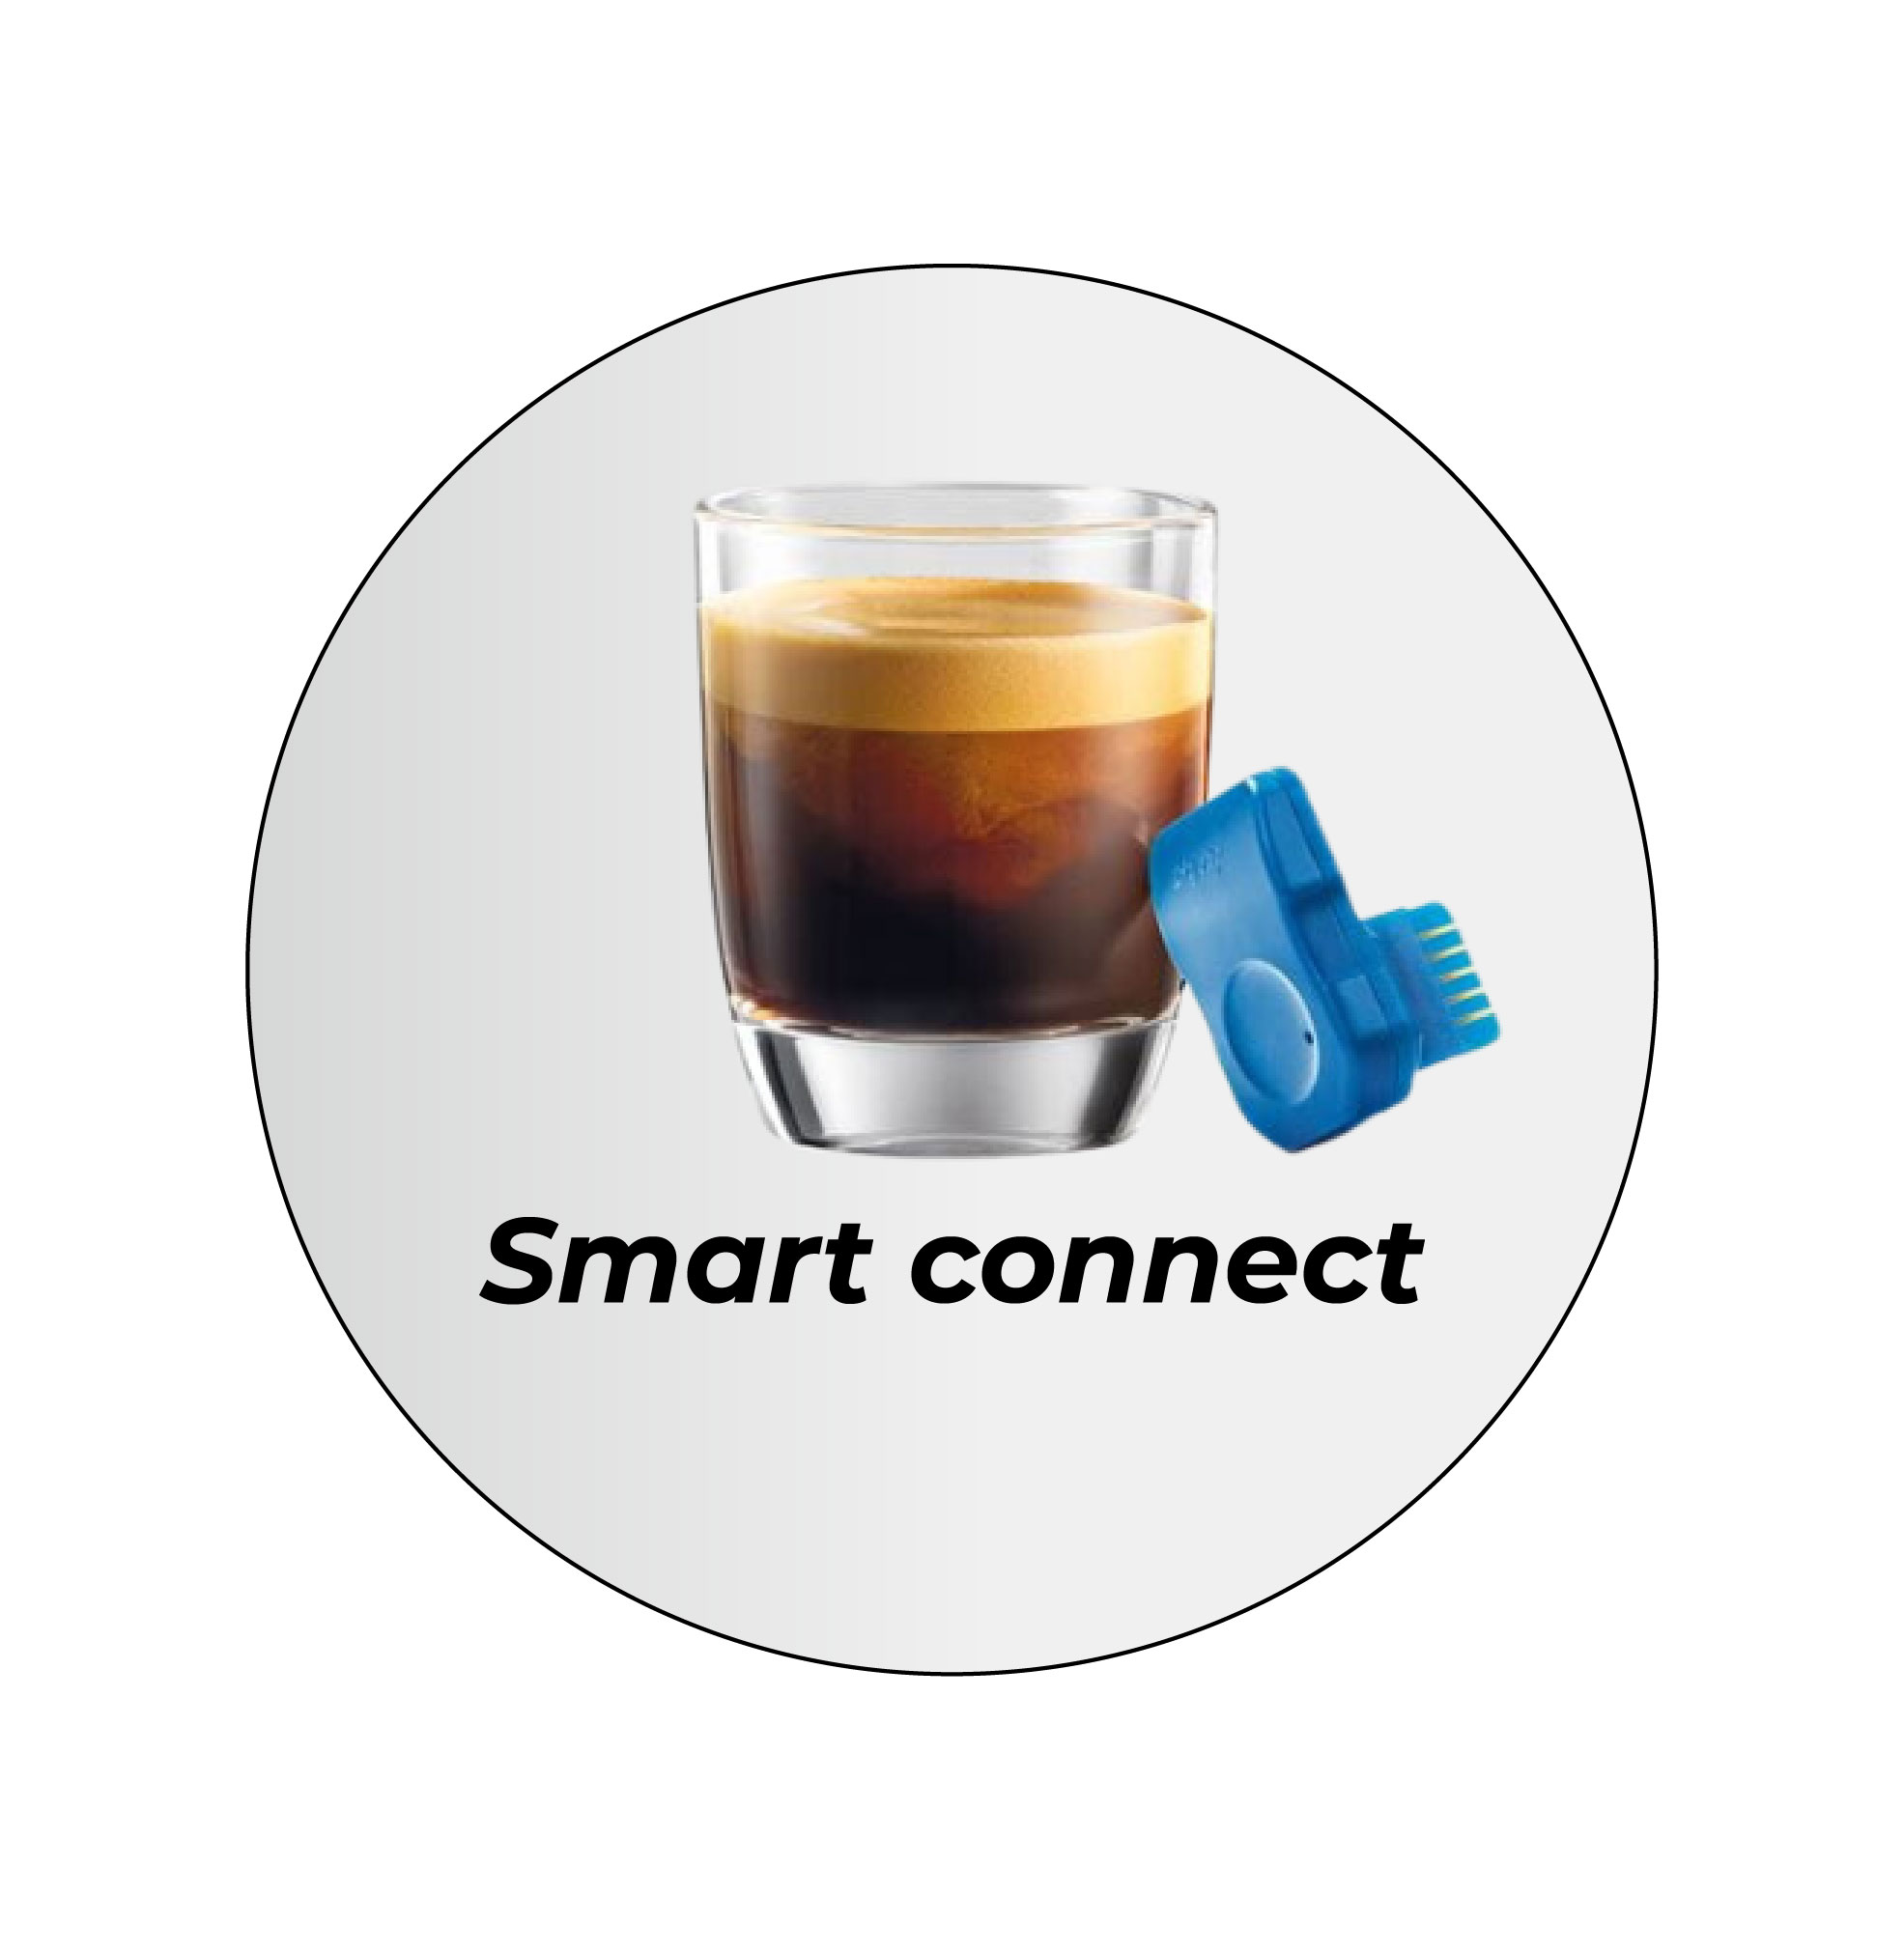 smart-connect